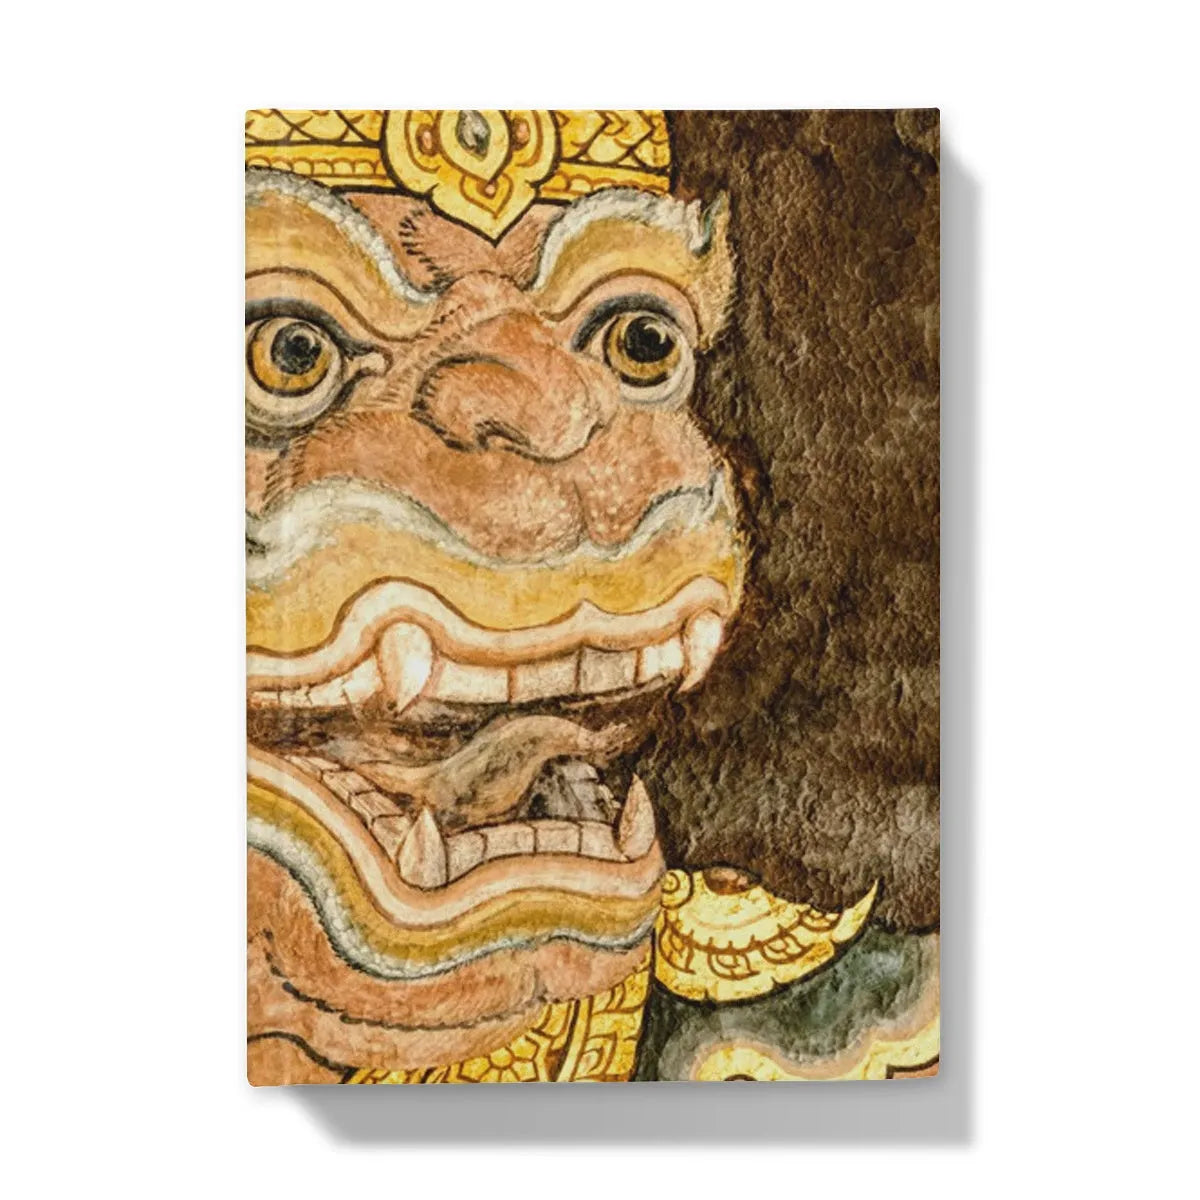 Monkey See Hardback Journal - 5’x7’ / 5’ x 7’ - Lined Paper - Notebooks & Notepads - Aesthetic Art